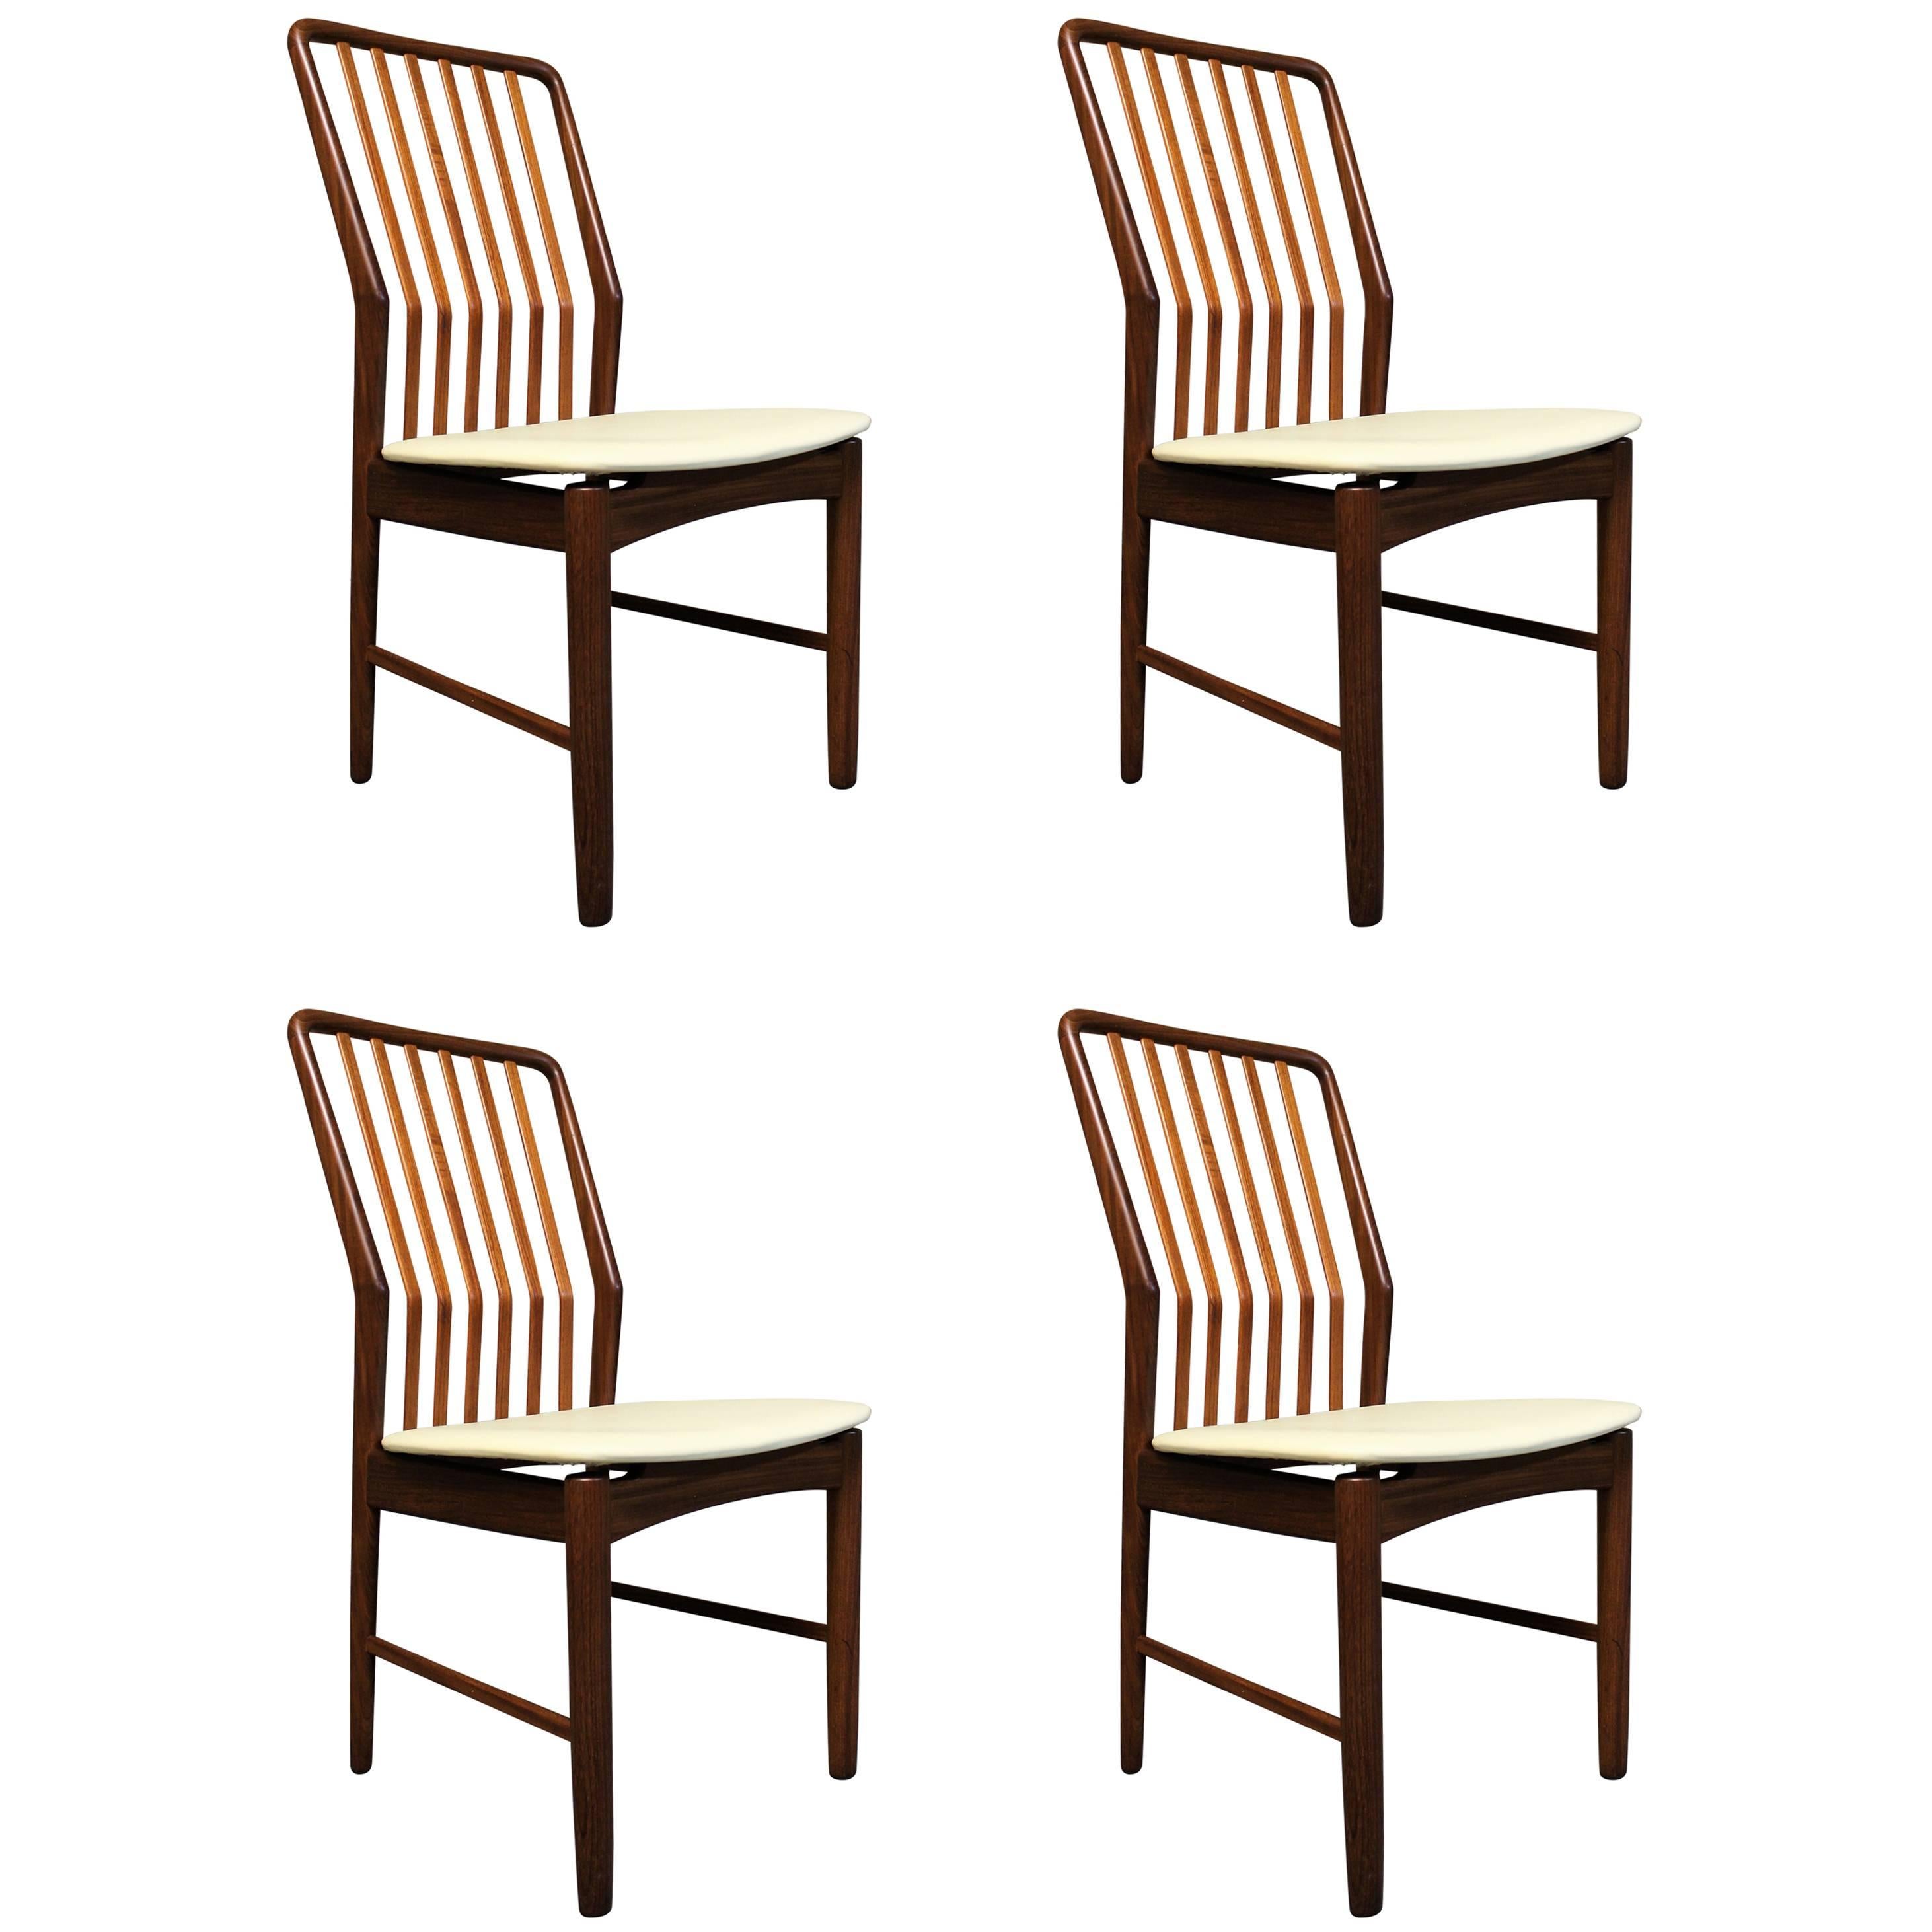 Four Svend Madsen Afromosia Wood and Leather Danish Dining Chairs